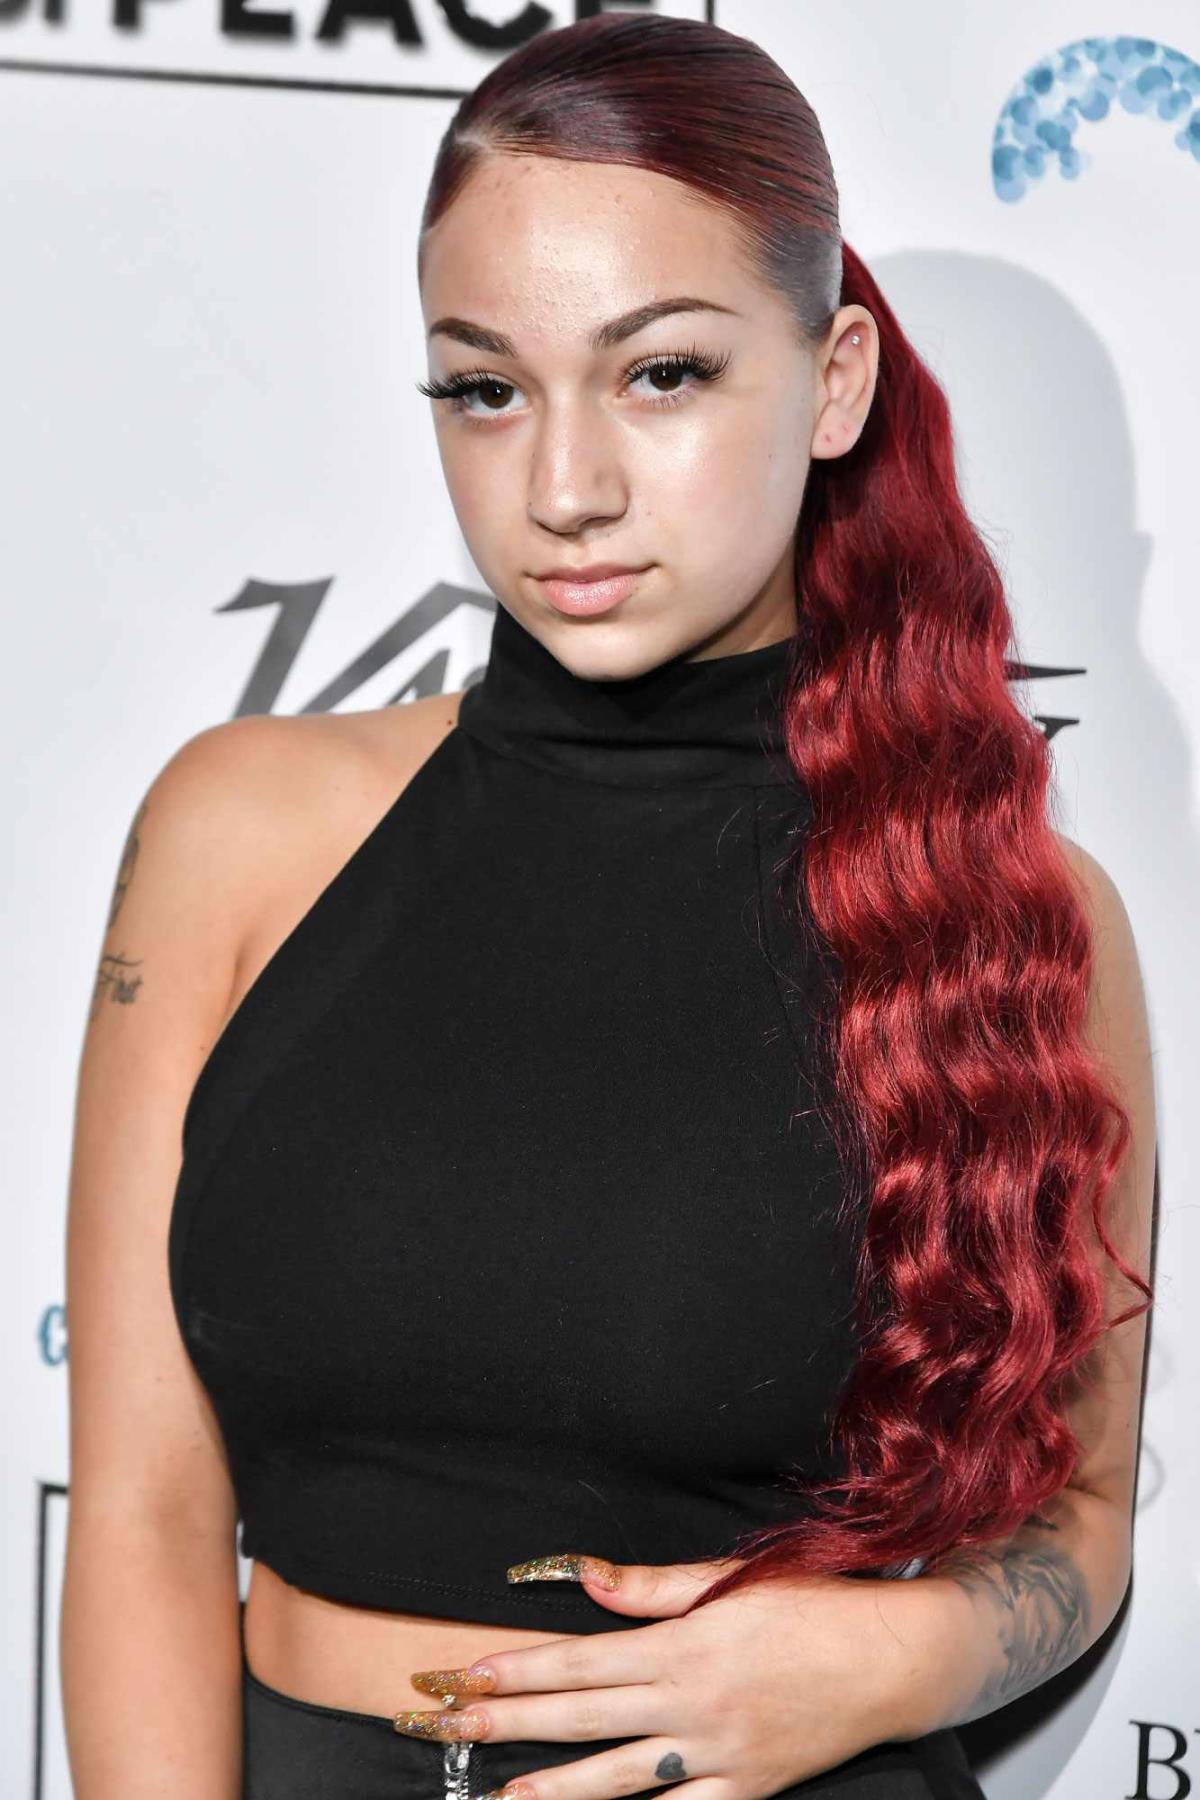 alexis gallegos recommends bhad bhabie see through pic